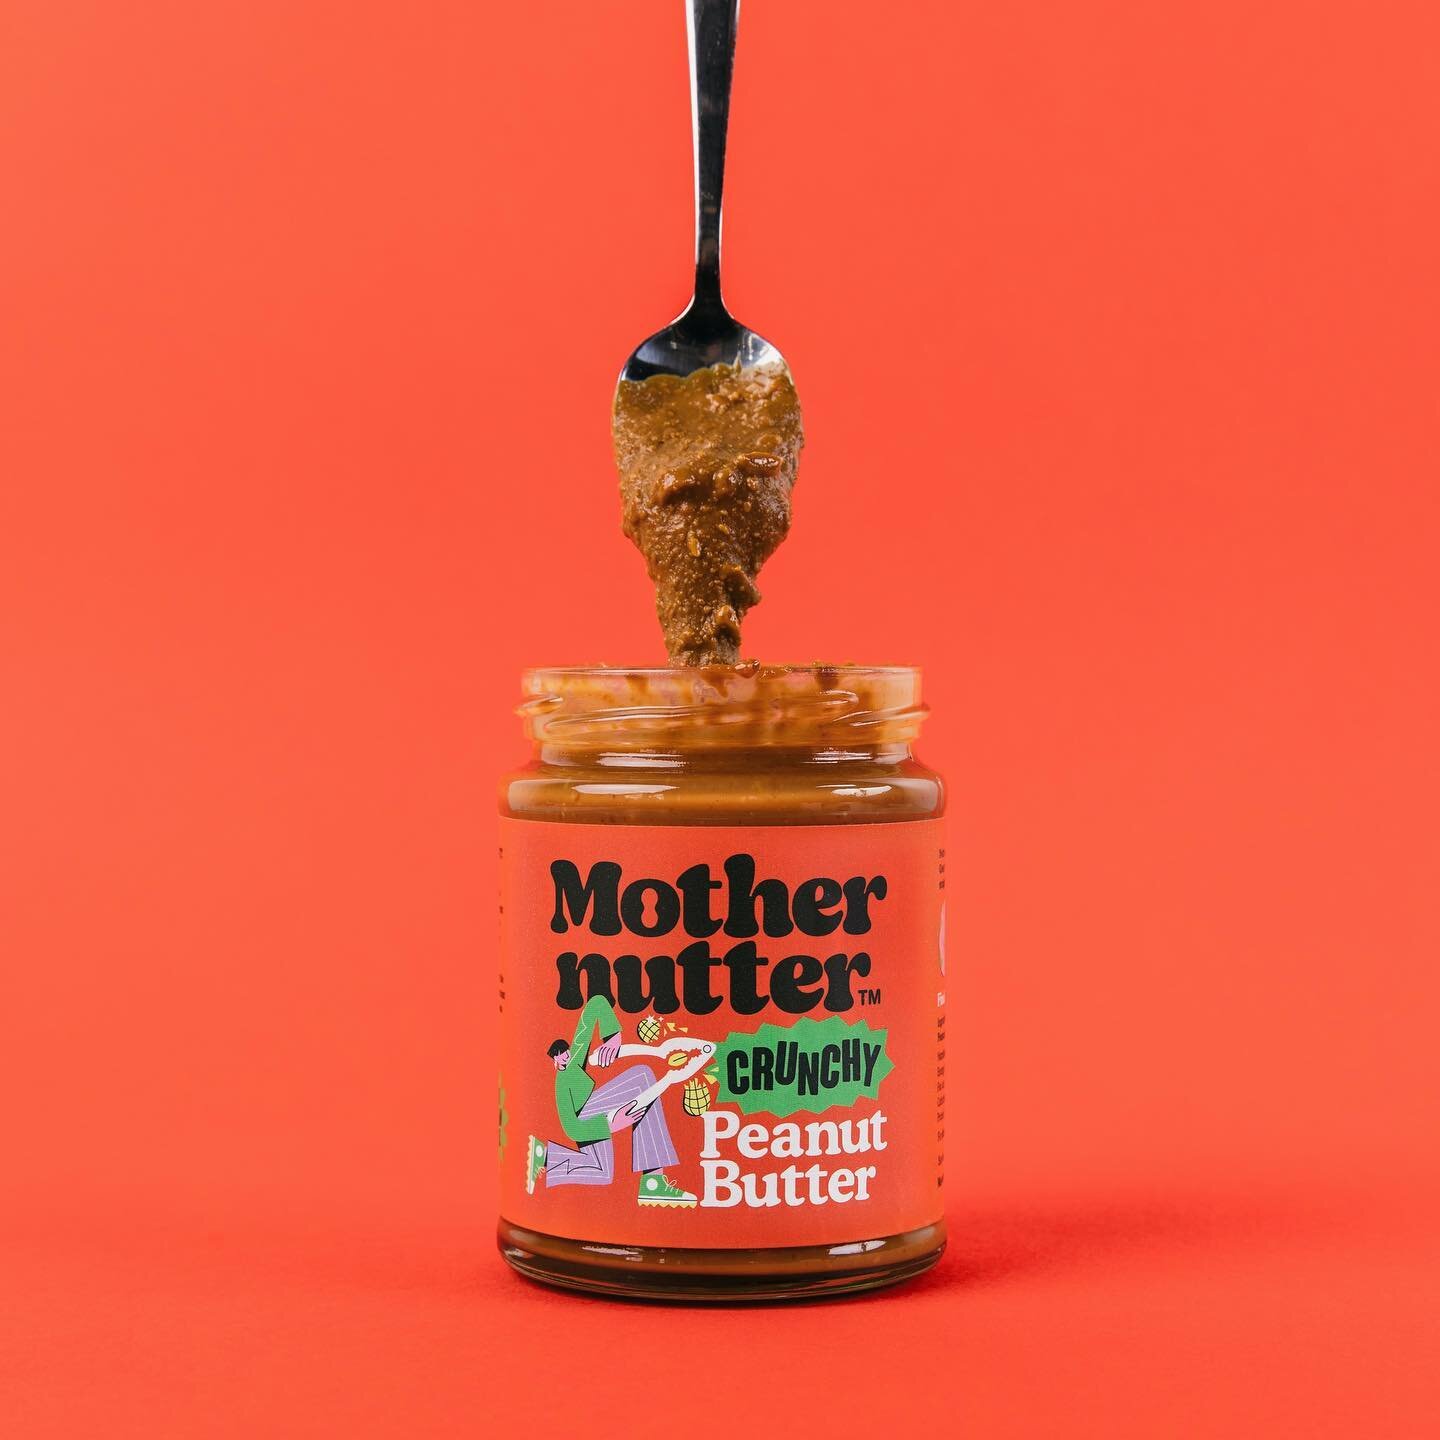 Welcome to @mothernutter_ 🥜

Joining the Wild &amp; Fruitful range is the punchy and dramatic Mothernutter Peanut Butter brand, Nut Butters for a new generation. Made from the best South American Hi Oleic Peanuts, a dash of sea salt, and nothing els